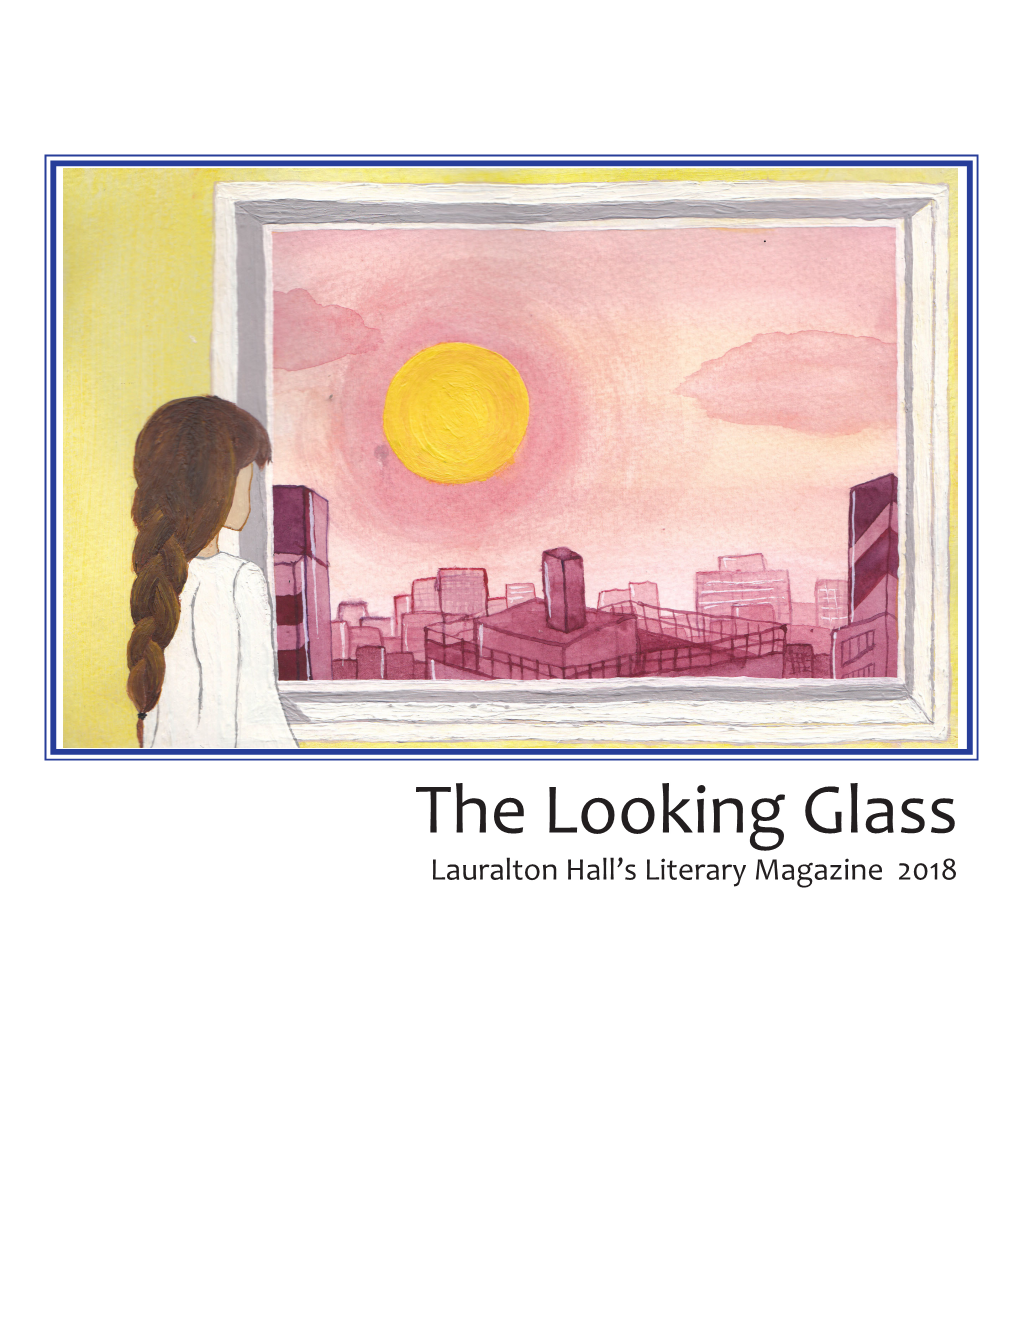 The Looking Glass Lauralton Hall’S Literary Magazine 2018 Bumbling and Buzzing—The Bees Fly Julia Elizabeth Petalcorin, ‘18